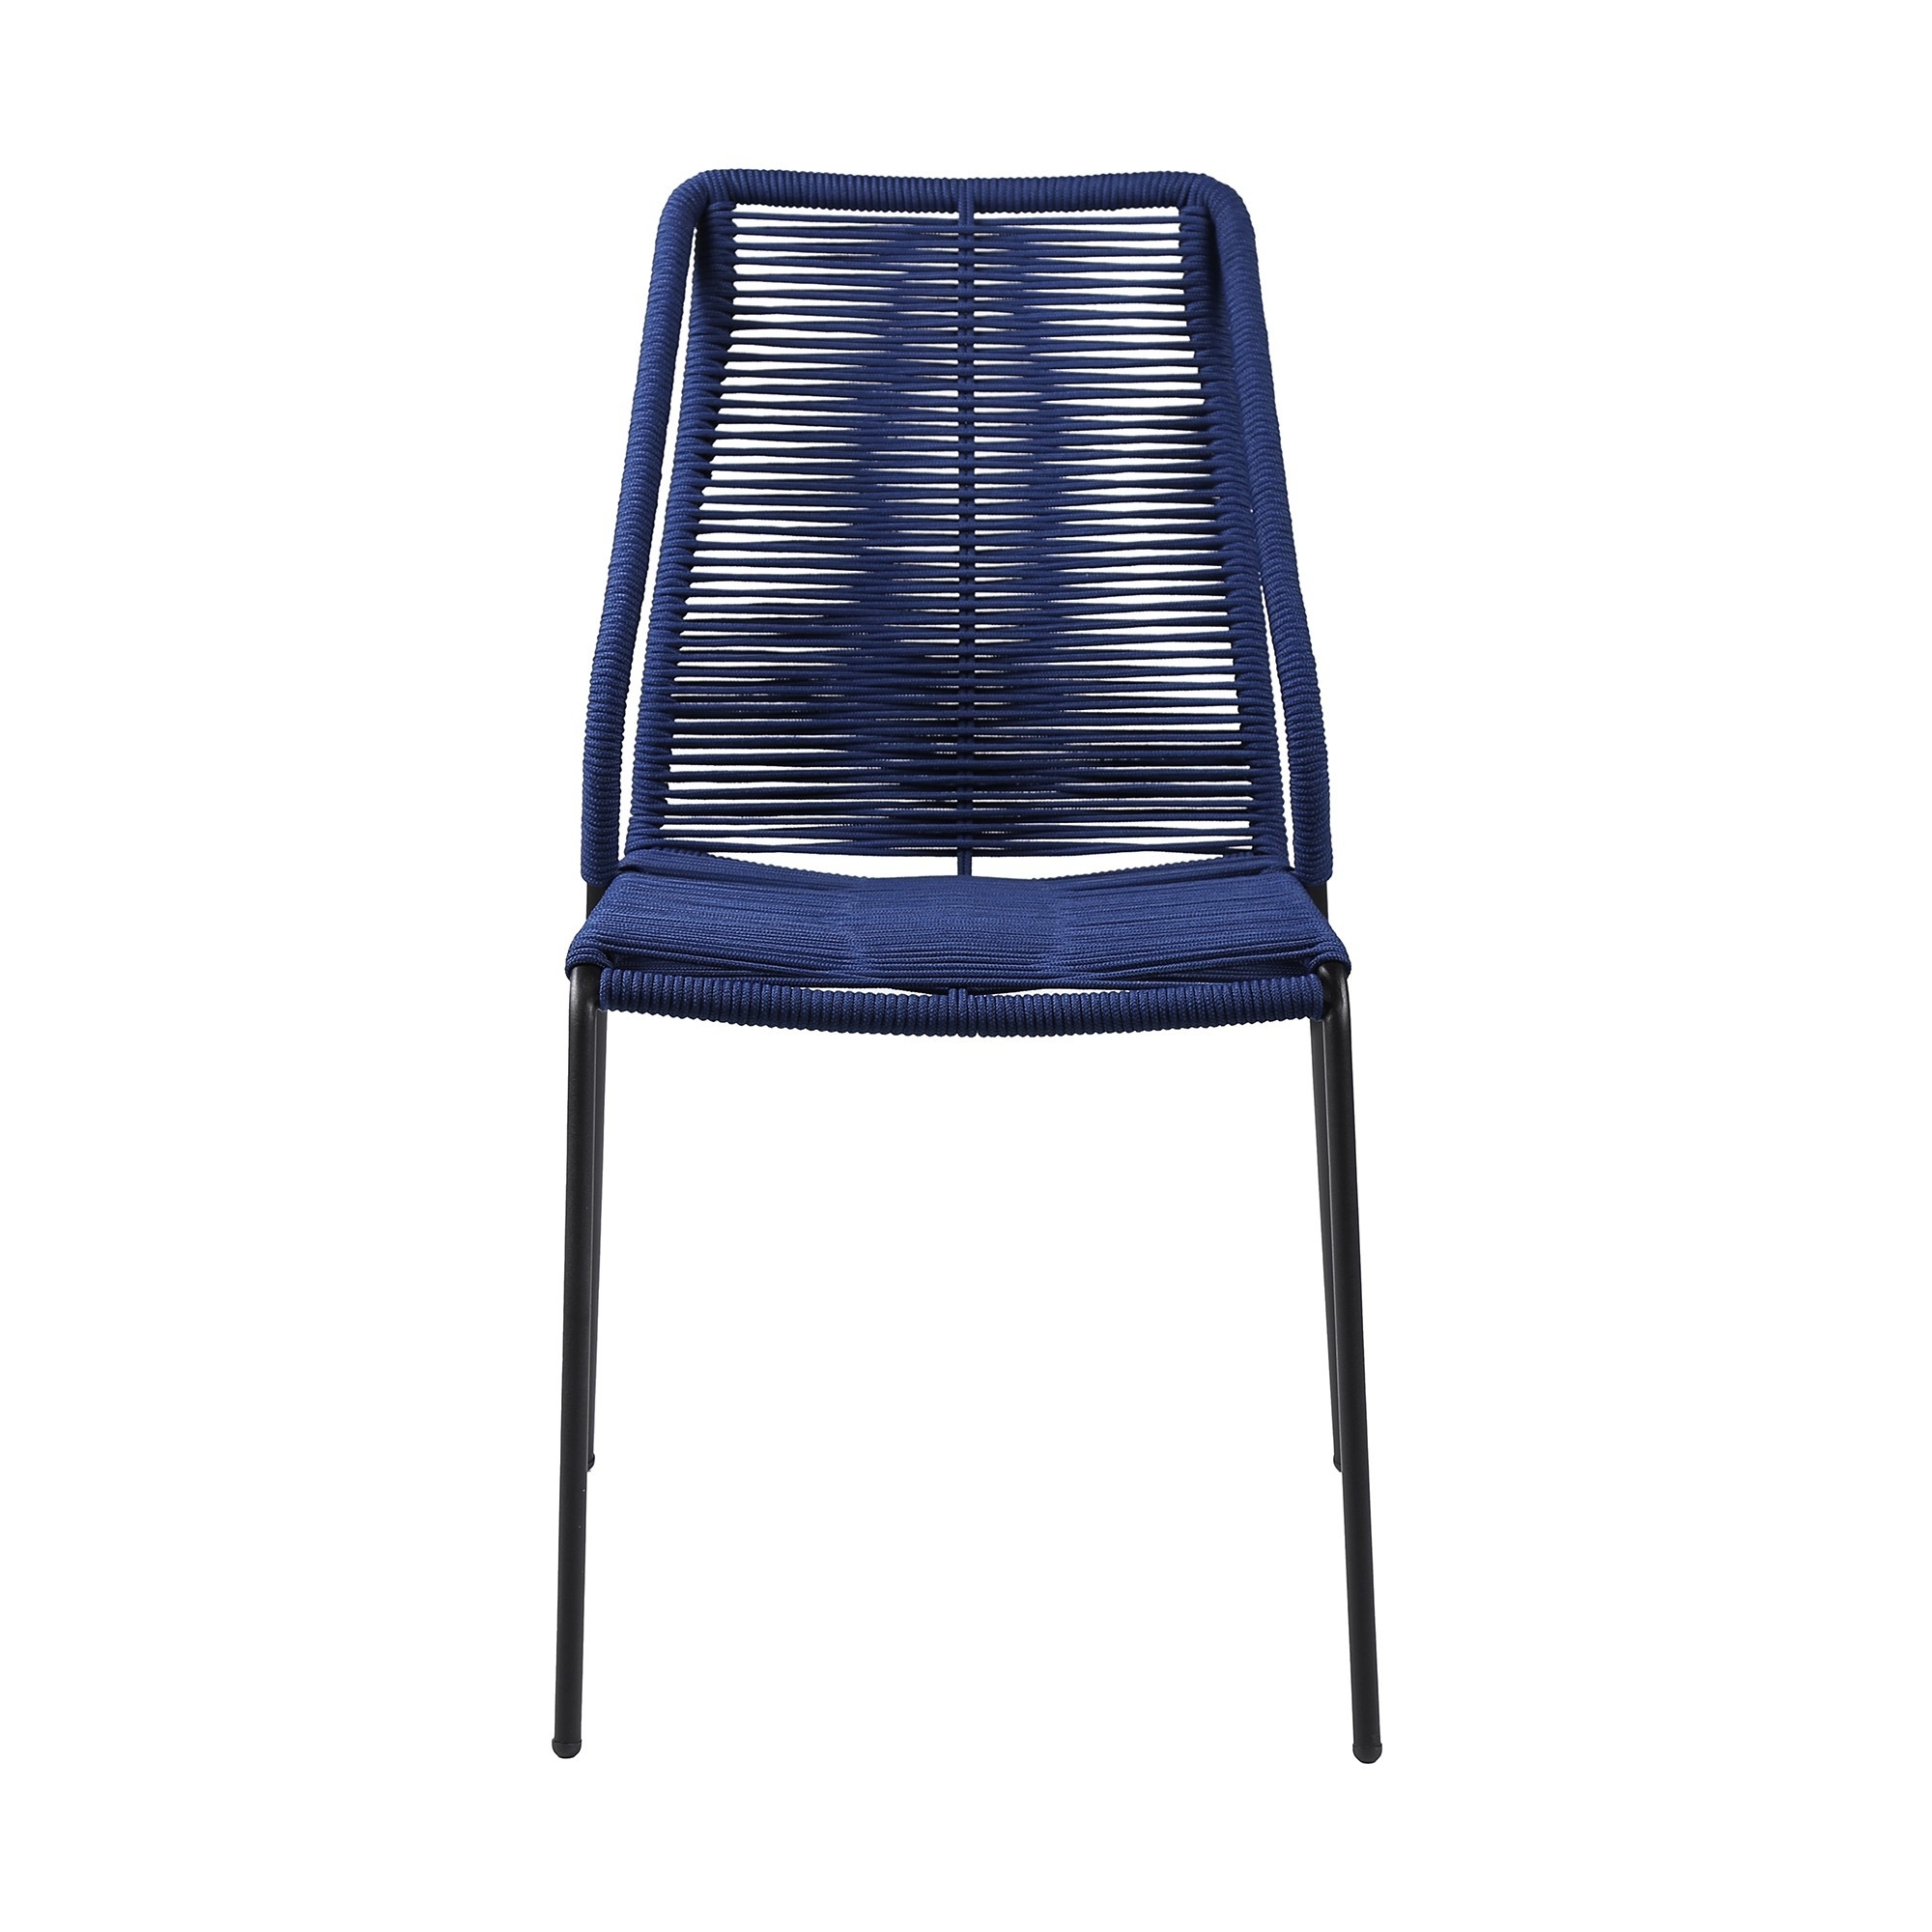 Indoor Outdoor Dining Chair With Fishbone Woven Seating, Set Of 2, Blue- Saltoro Sherpi